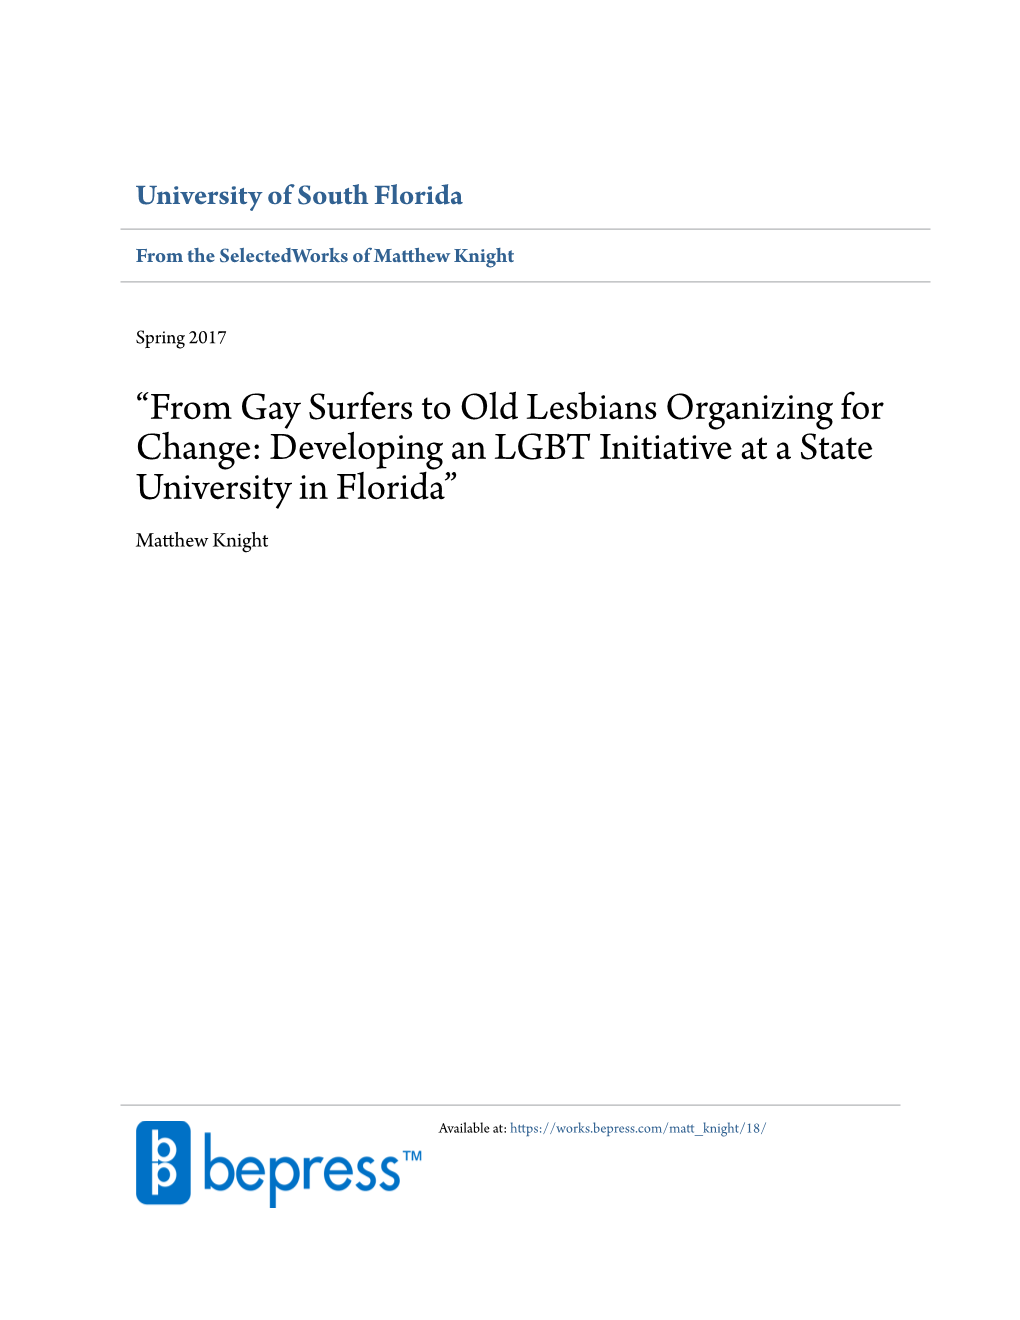 From Gay Surfers to Old Lesbians Organizing for Change: Developing an LGBT Initiative at a State University in Florida” Matthew Knight